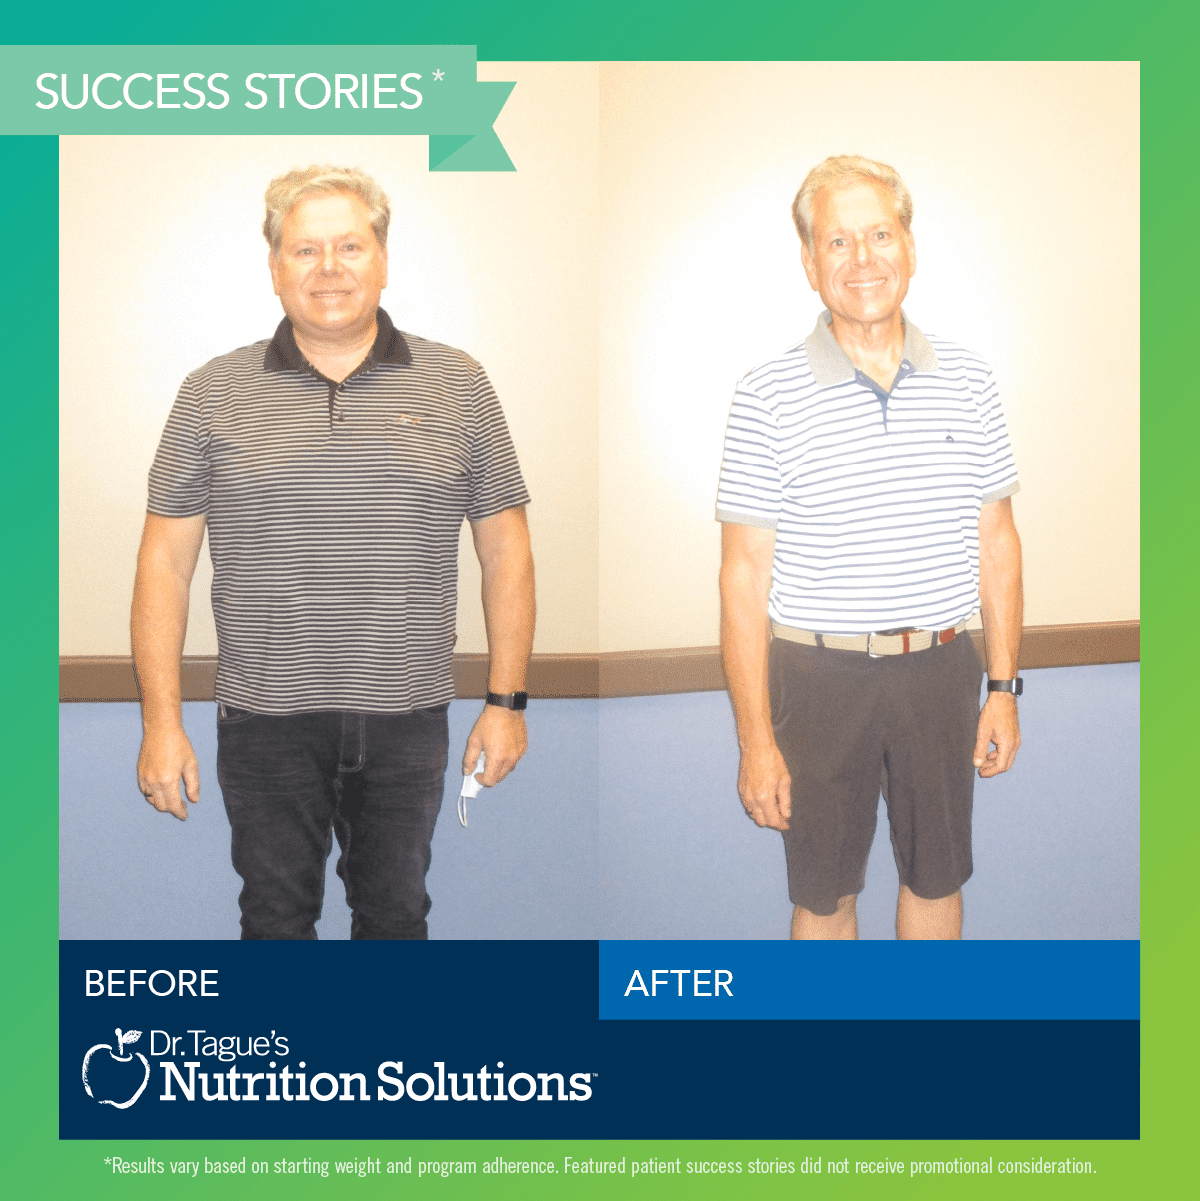 Herman lost 68 pounds on Dr. Tague's treatment plan!